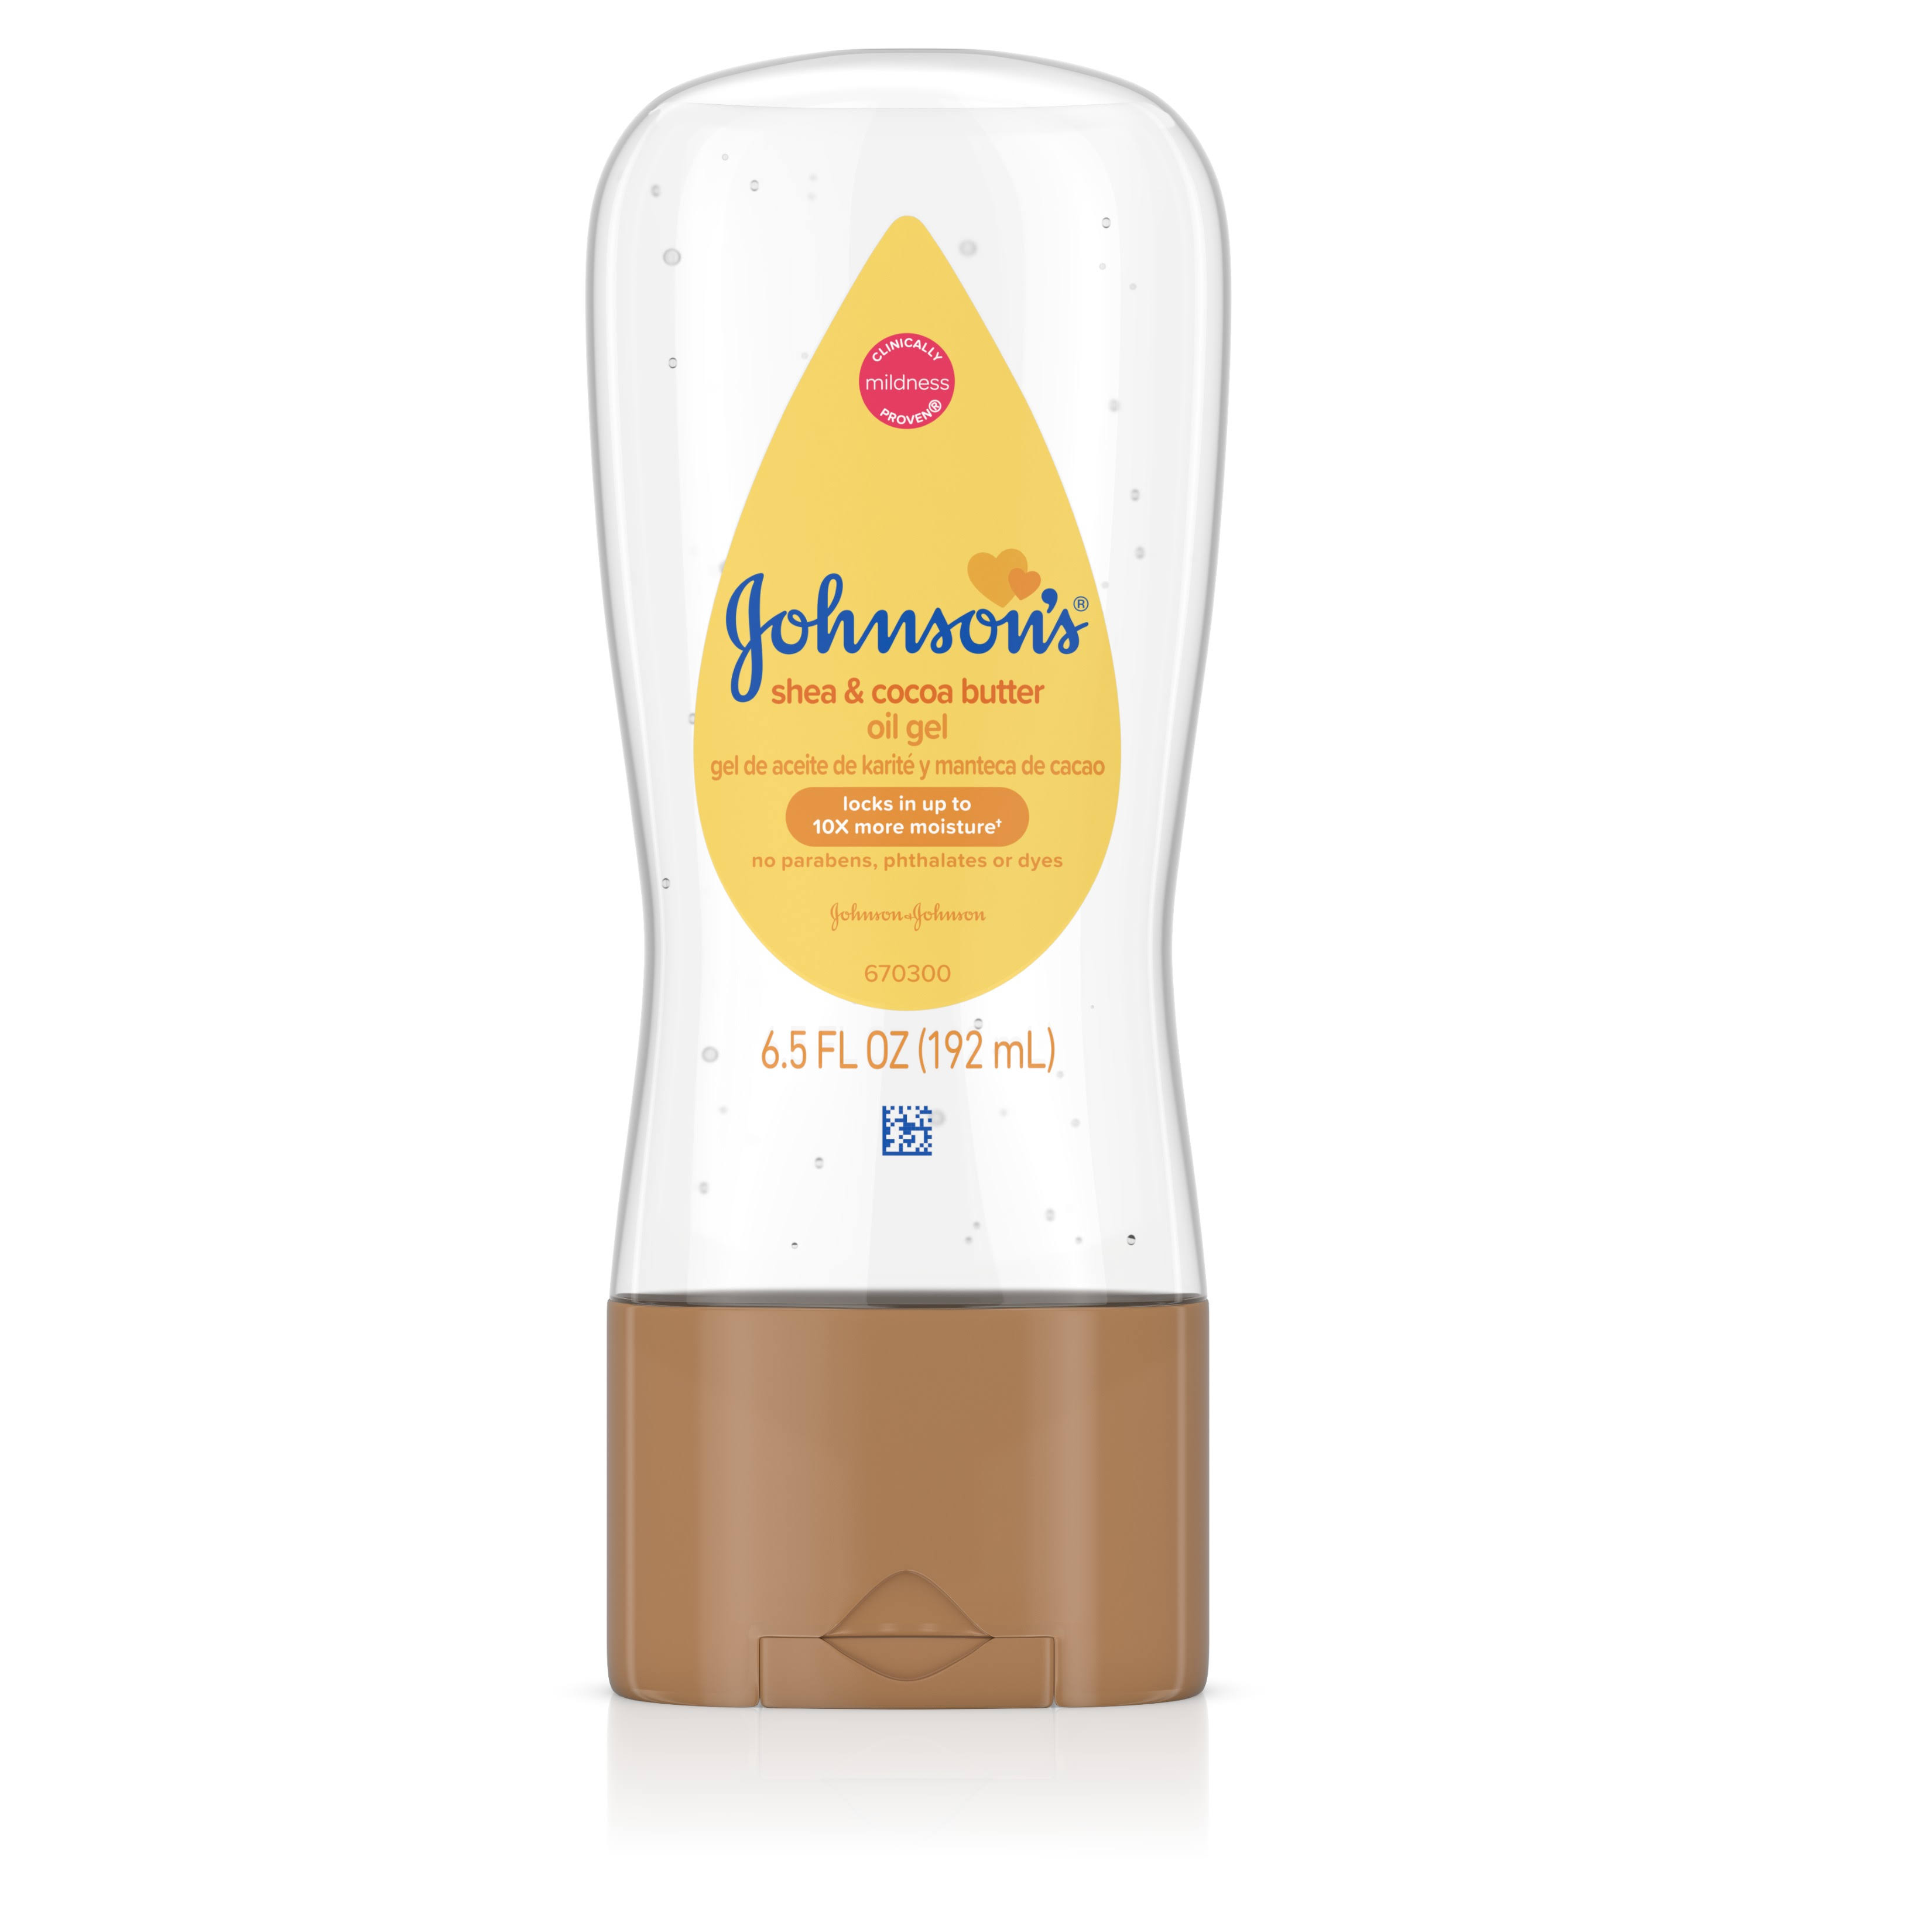 Johnson's Baby Oil Gel - Shea and Cocoa Butter, 6.5oz